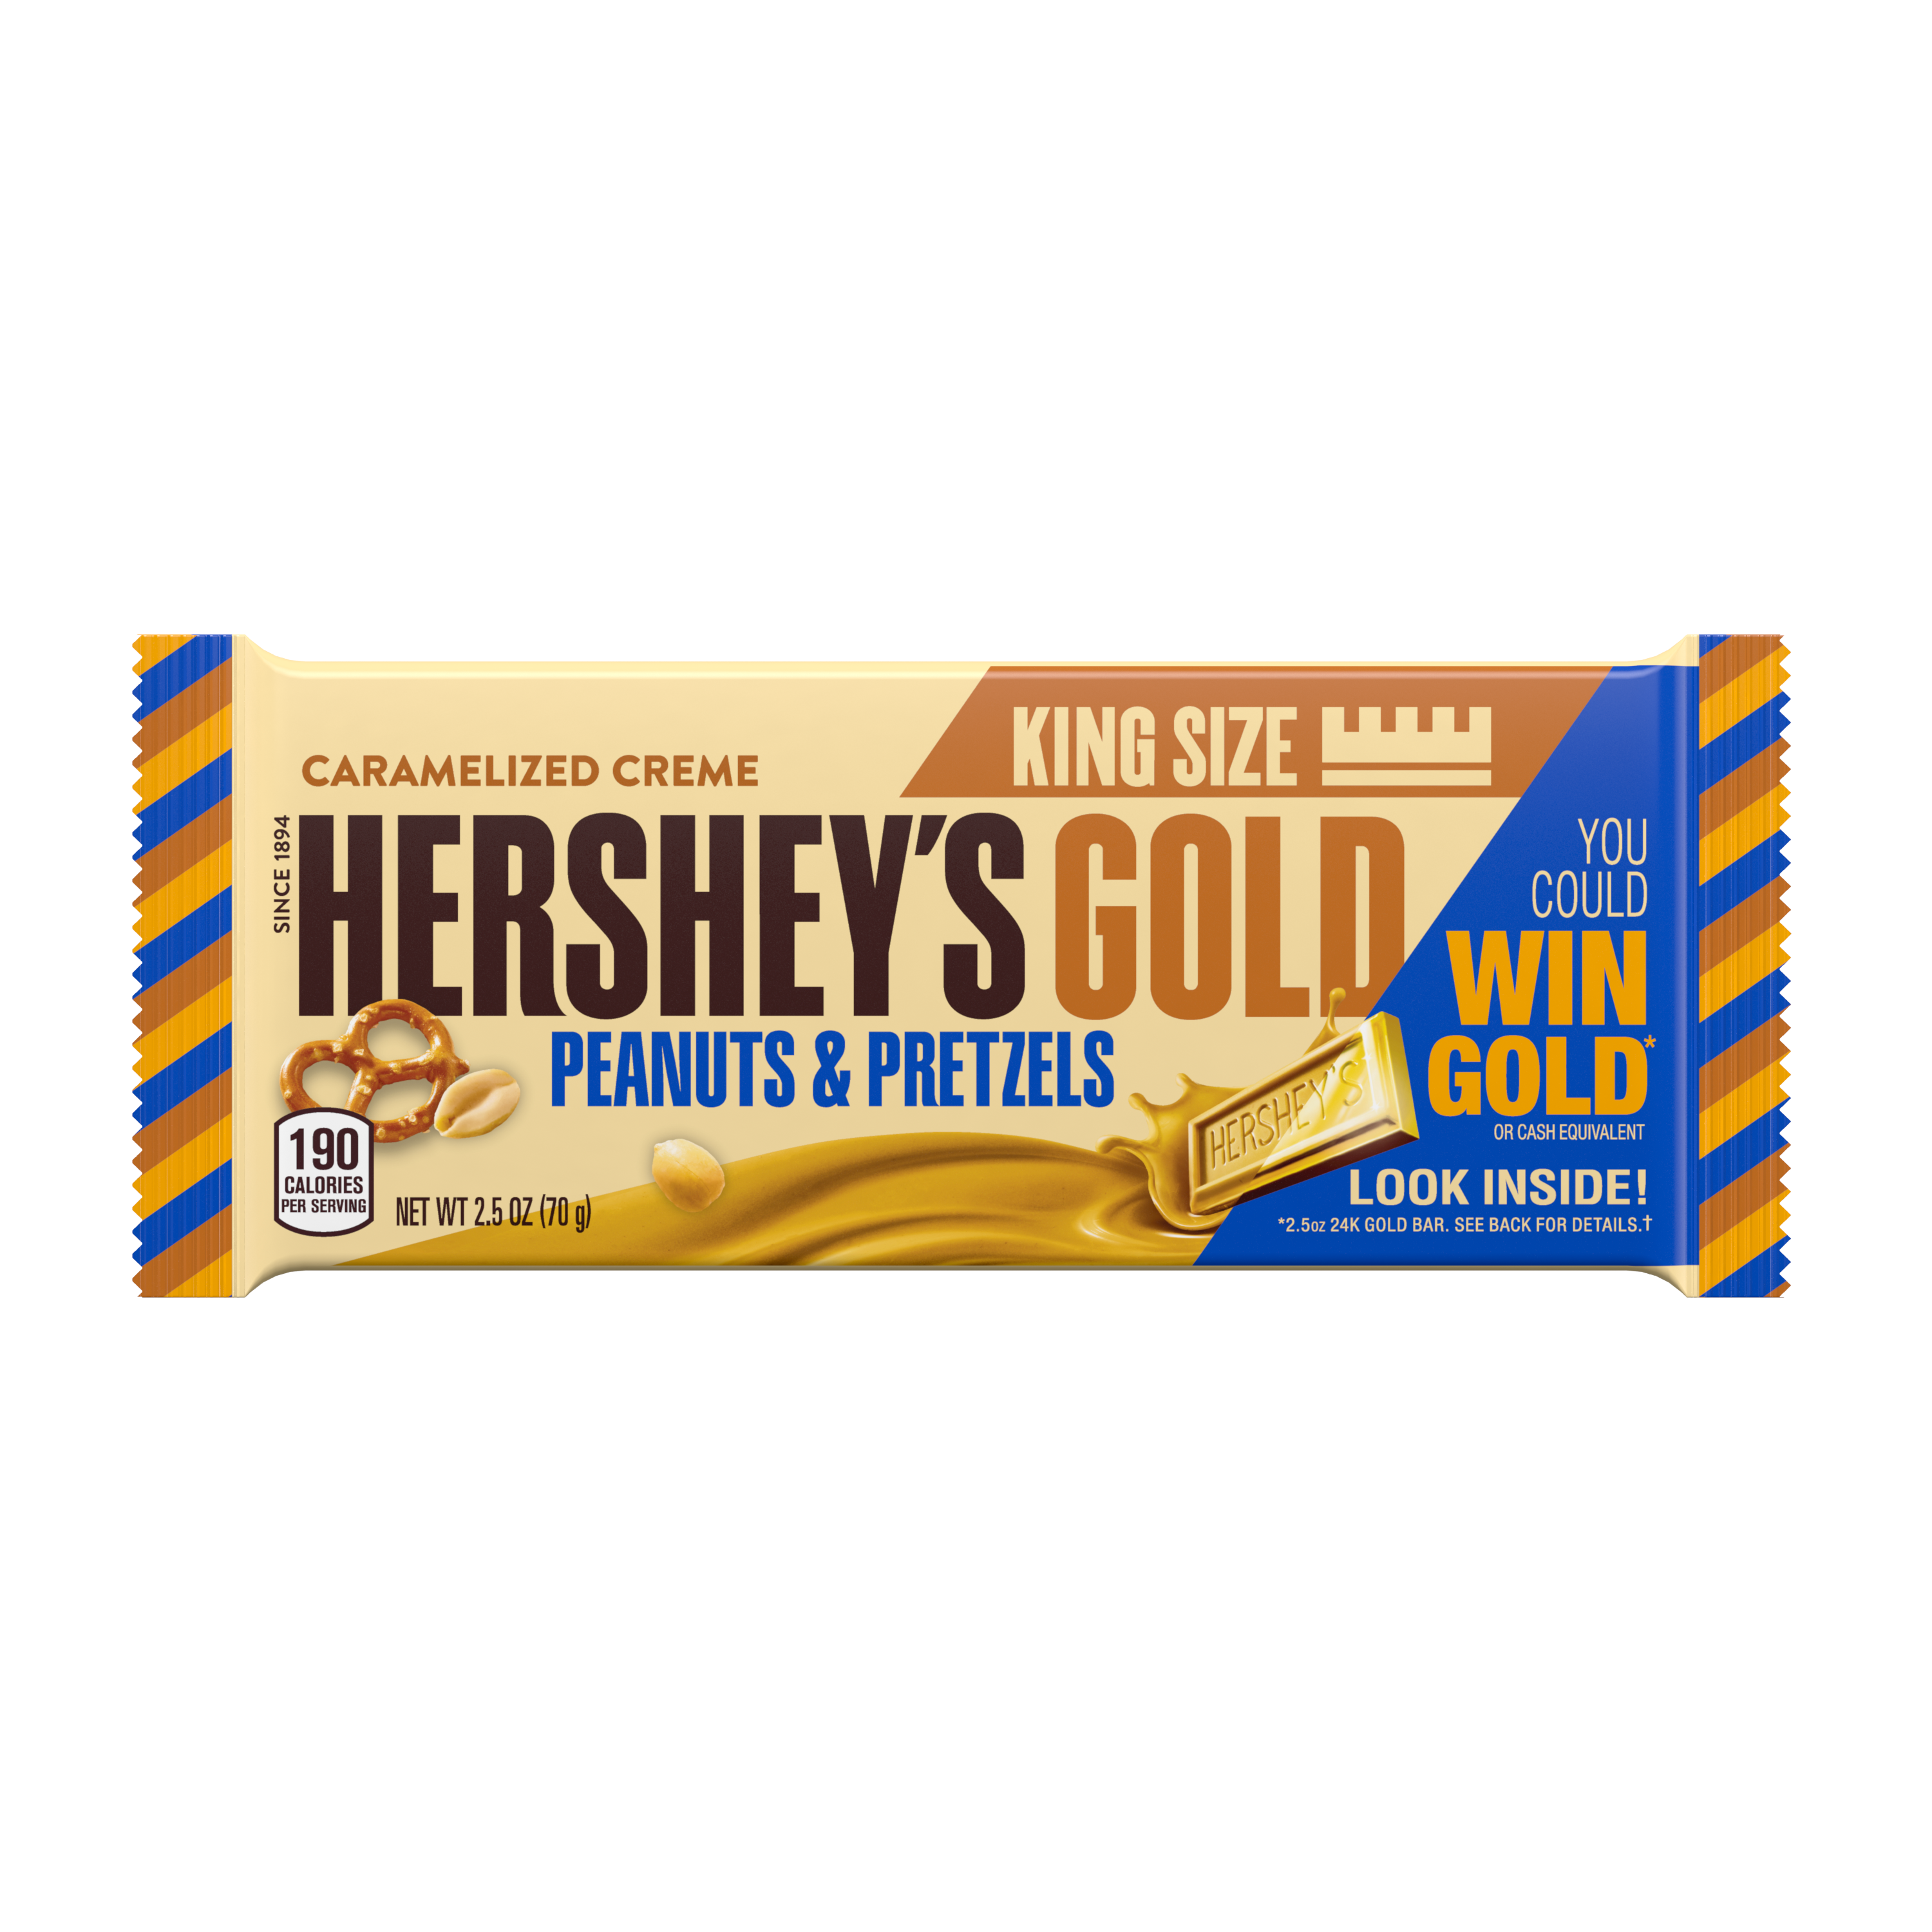 HERSHEY'S GOLD Peanuts & Pretzels in Caramelized Creme King Size Candy Bar, 2.5 oz - Front of Package